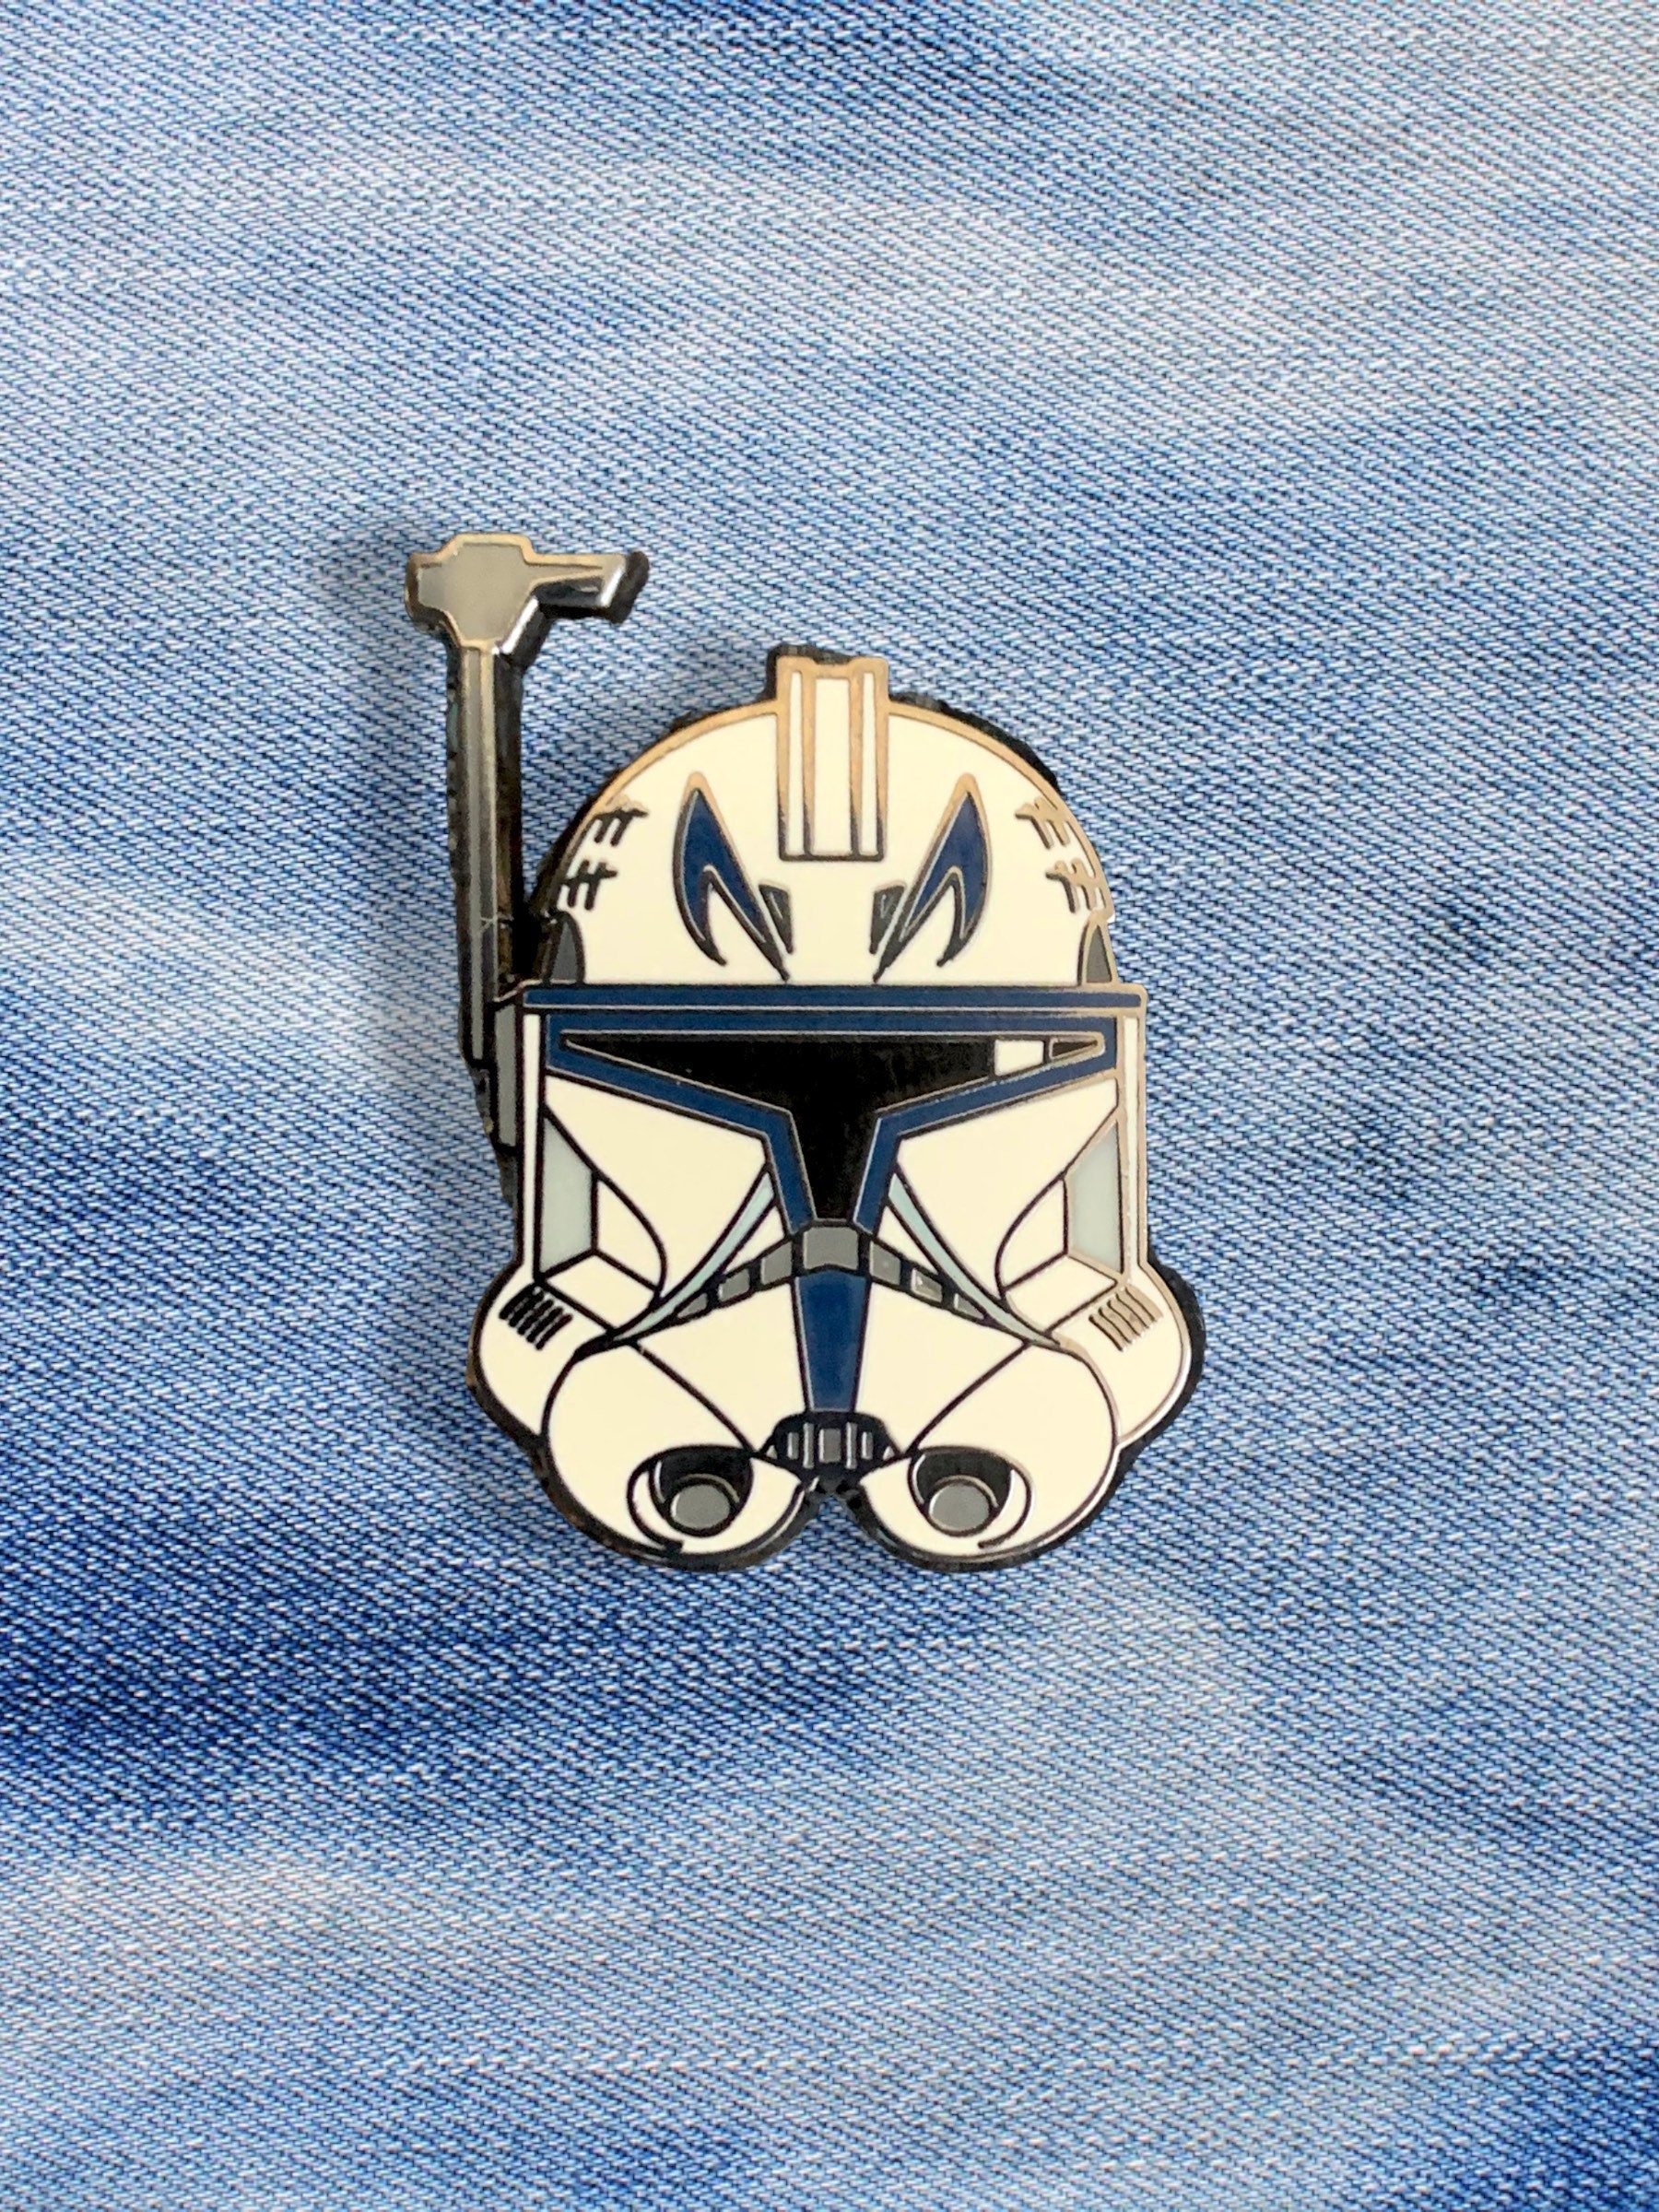 Star Wars Back Patches Embroidery. Pilot Storm Trooper Clone Trooper  Tiepilot Set 